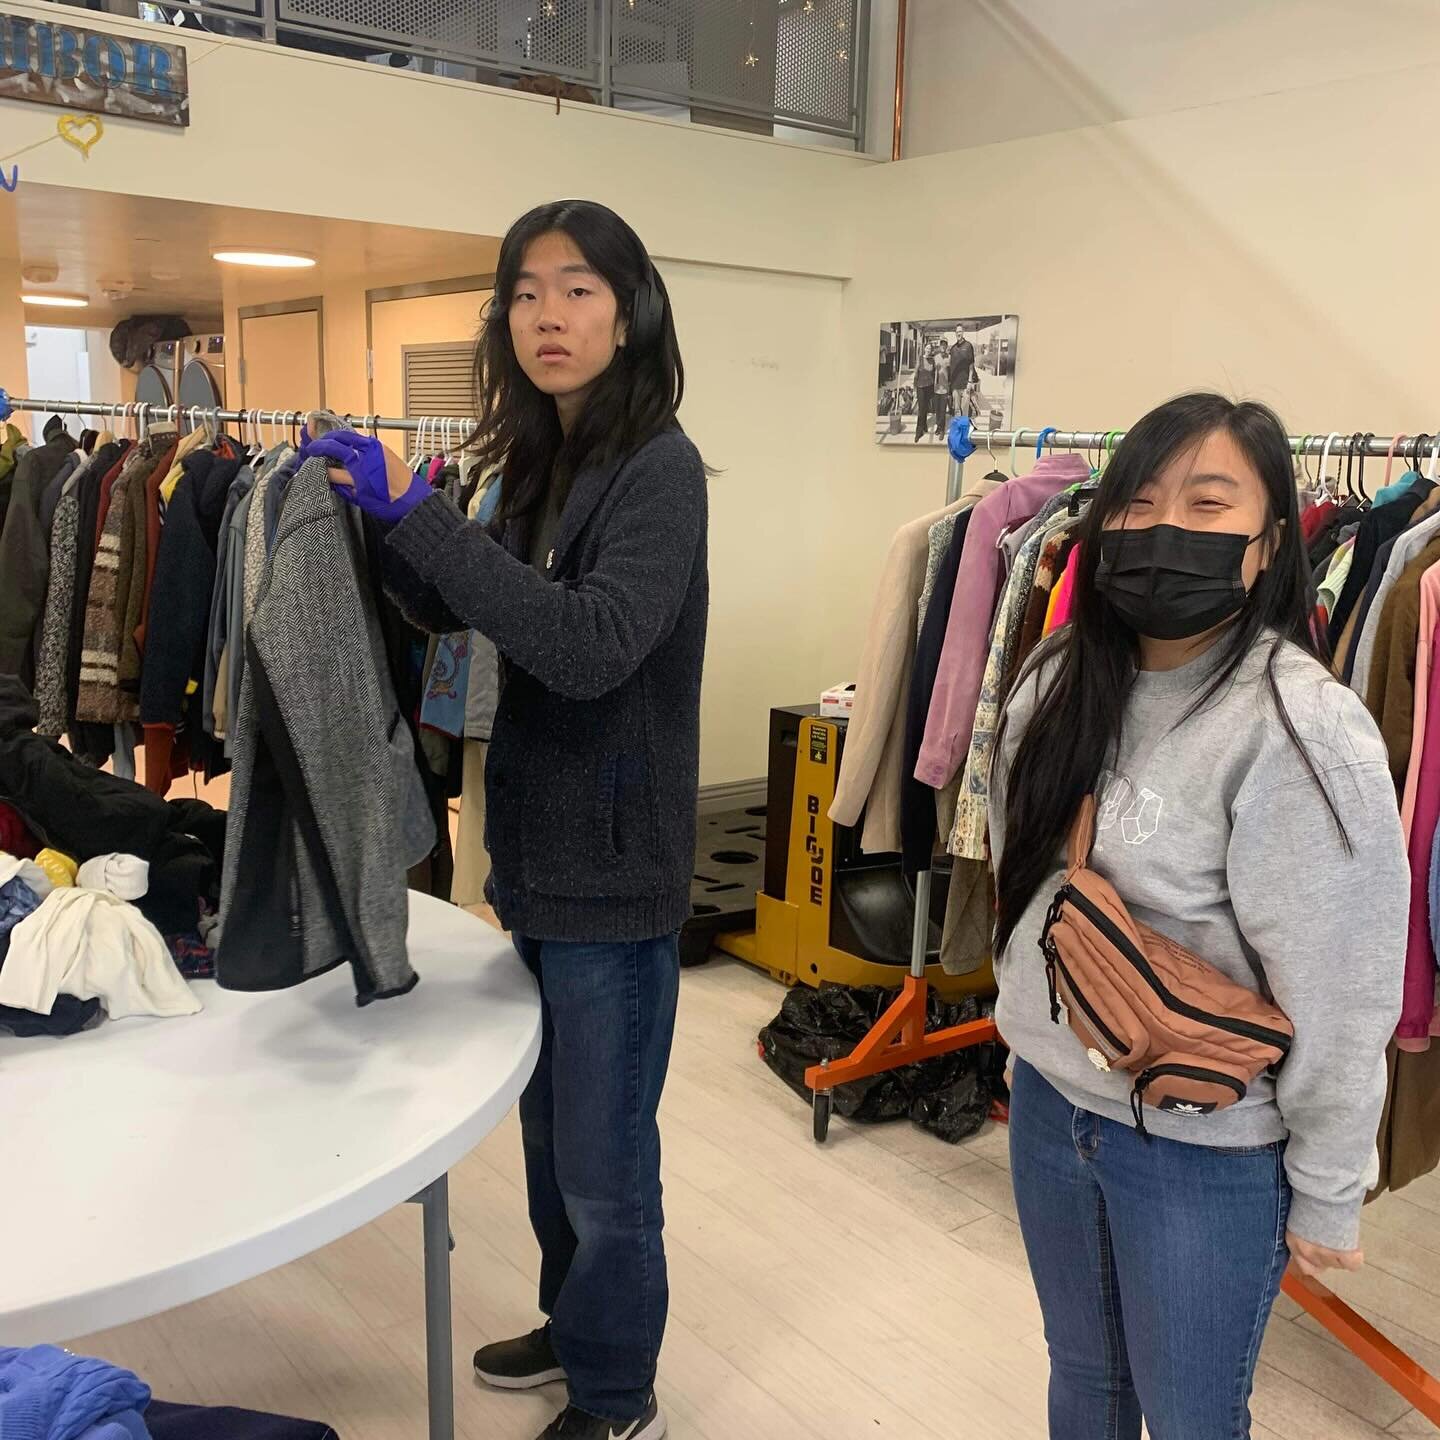 &lsquo;Tis the season for serving! 💖

This past Saturday, our Agape Fellowship helped serve at CityTeam Oakland. They say only God can move mountains, but our Agape volunteers moved mountains of clothes! They also helped prepare food for the shelter